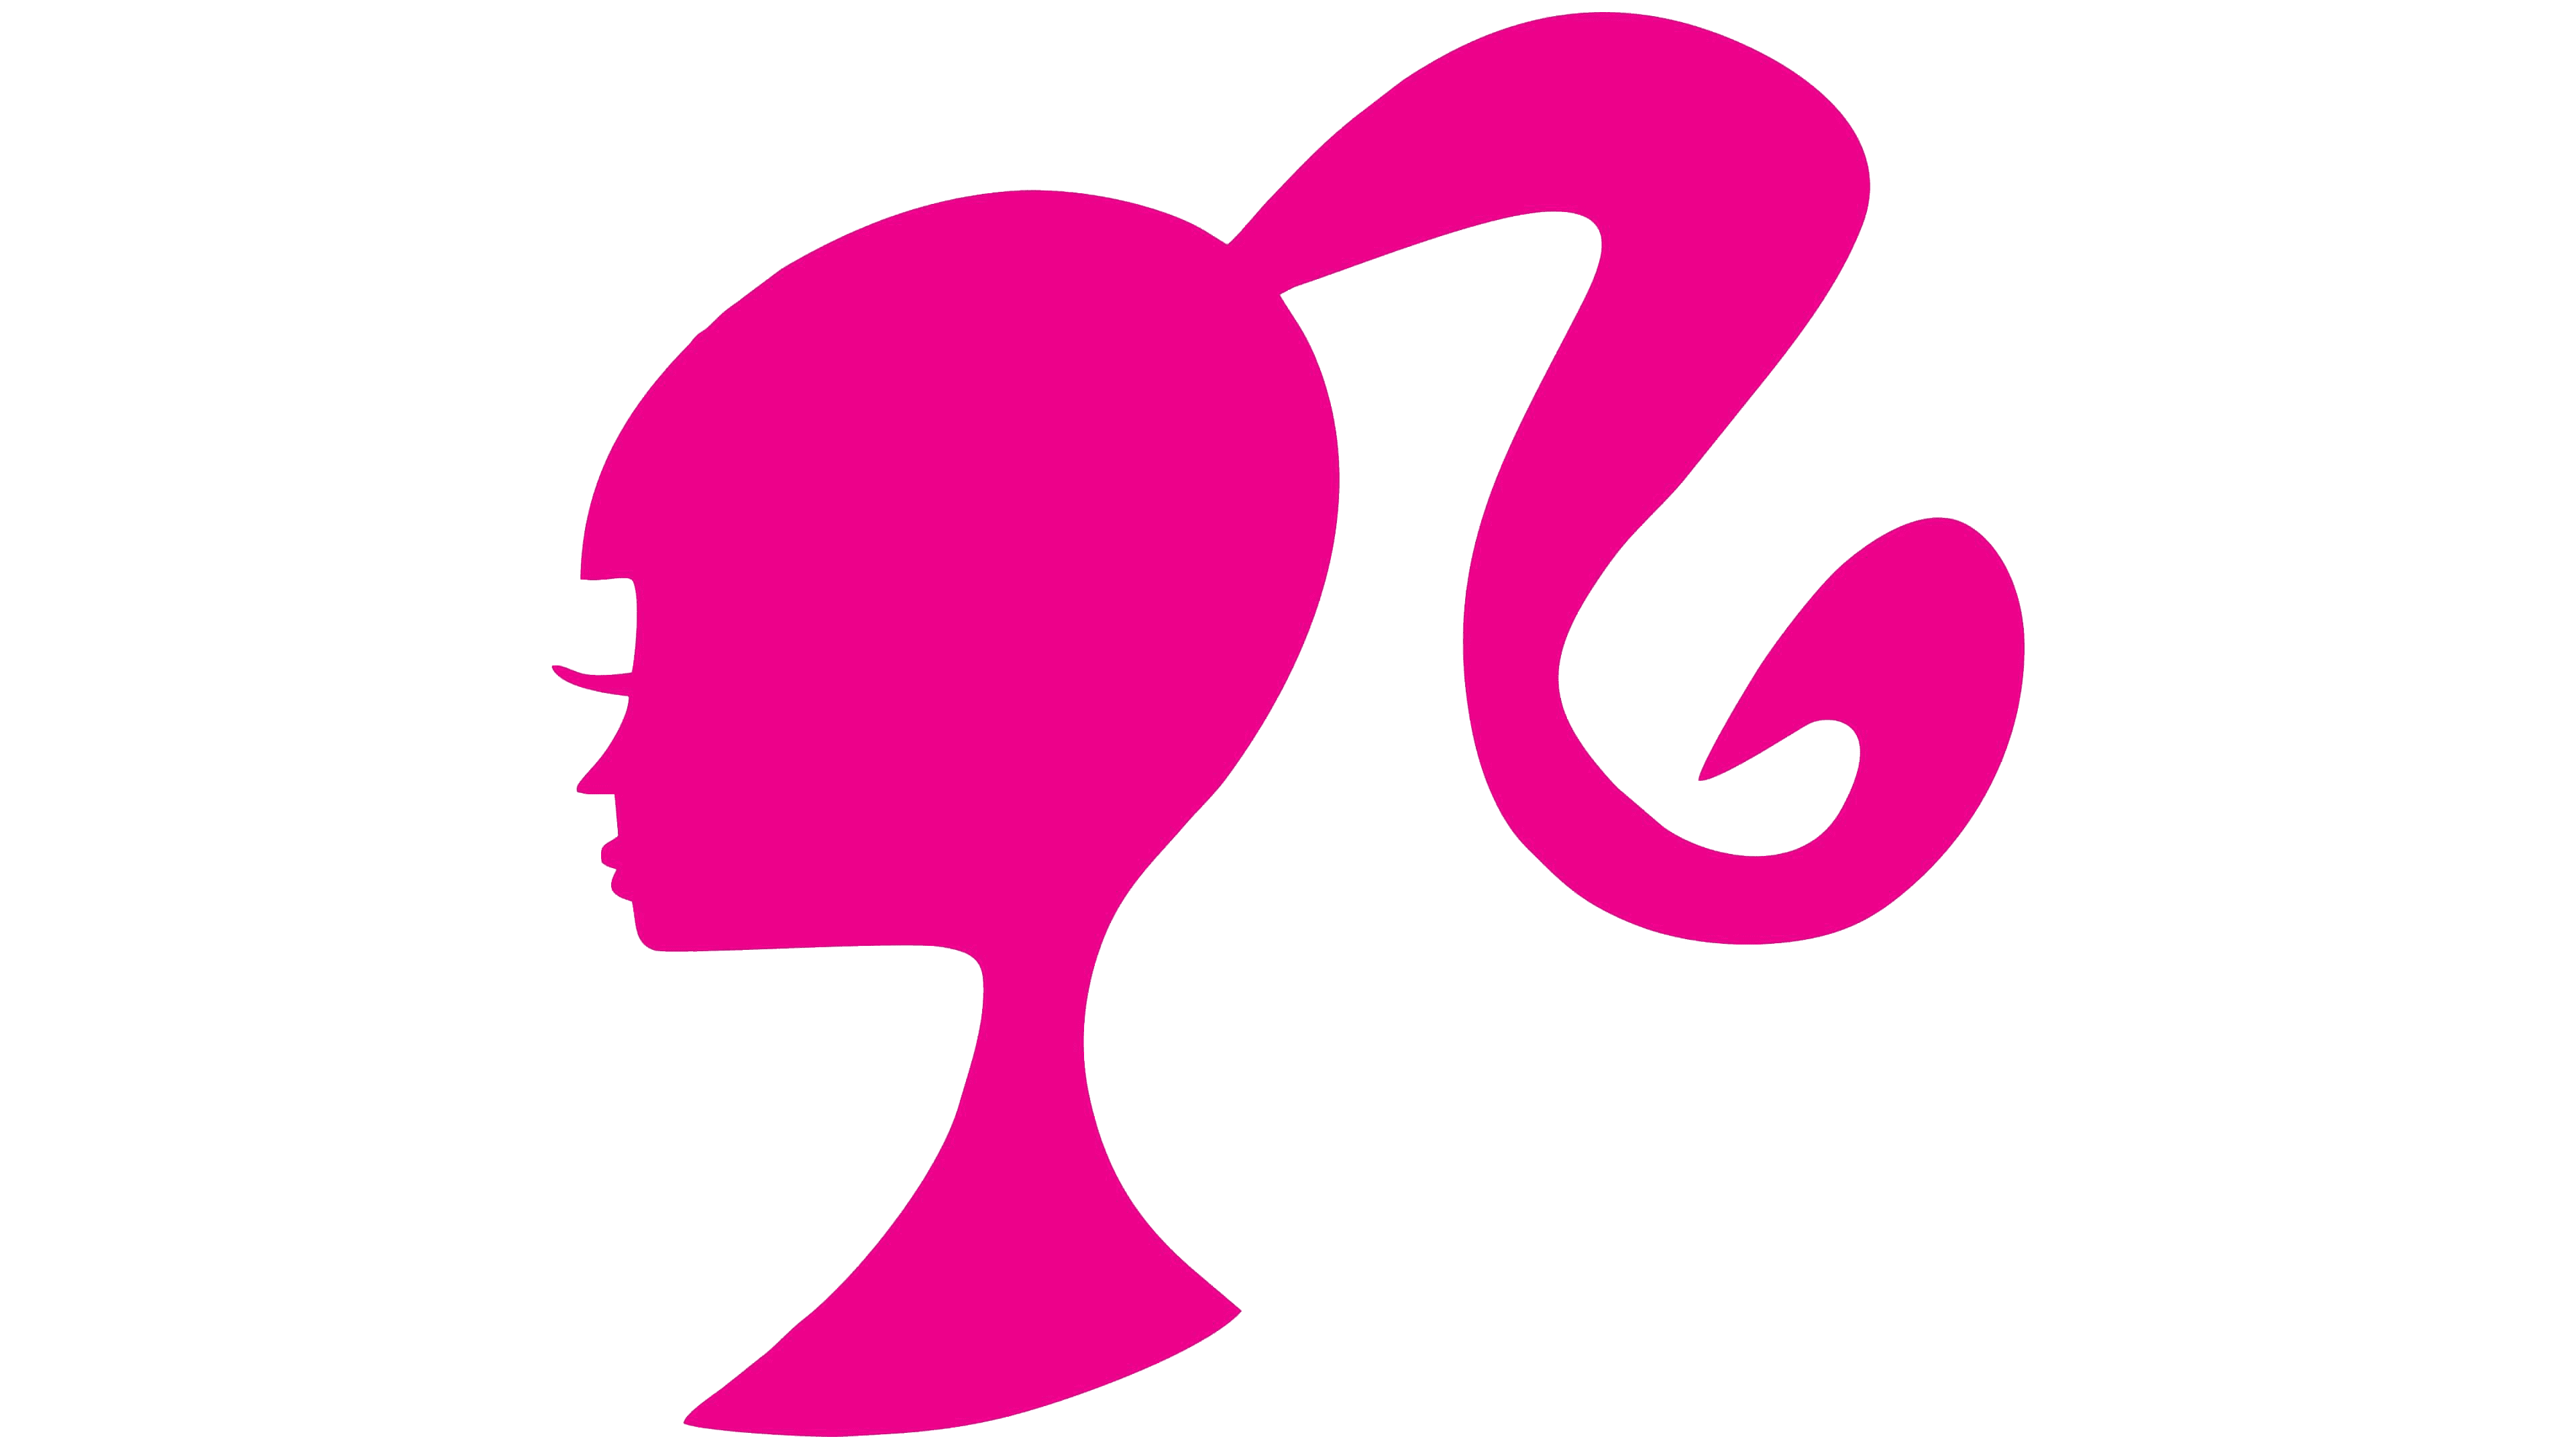 Barbie Girl Svg Barbie Svg Girl Svg Girl Head Svg Eps Dxf Png Images